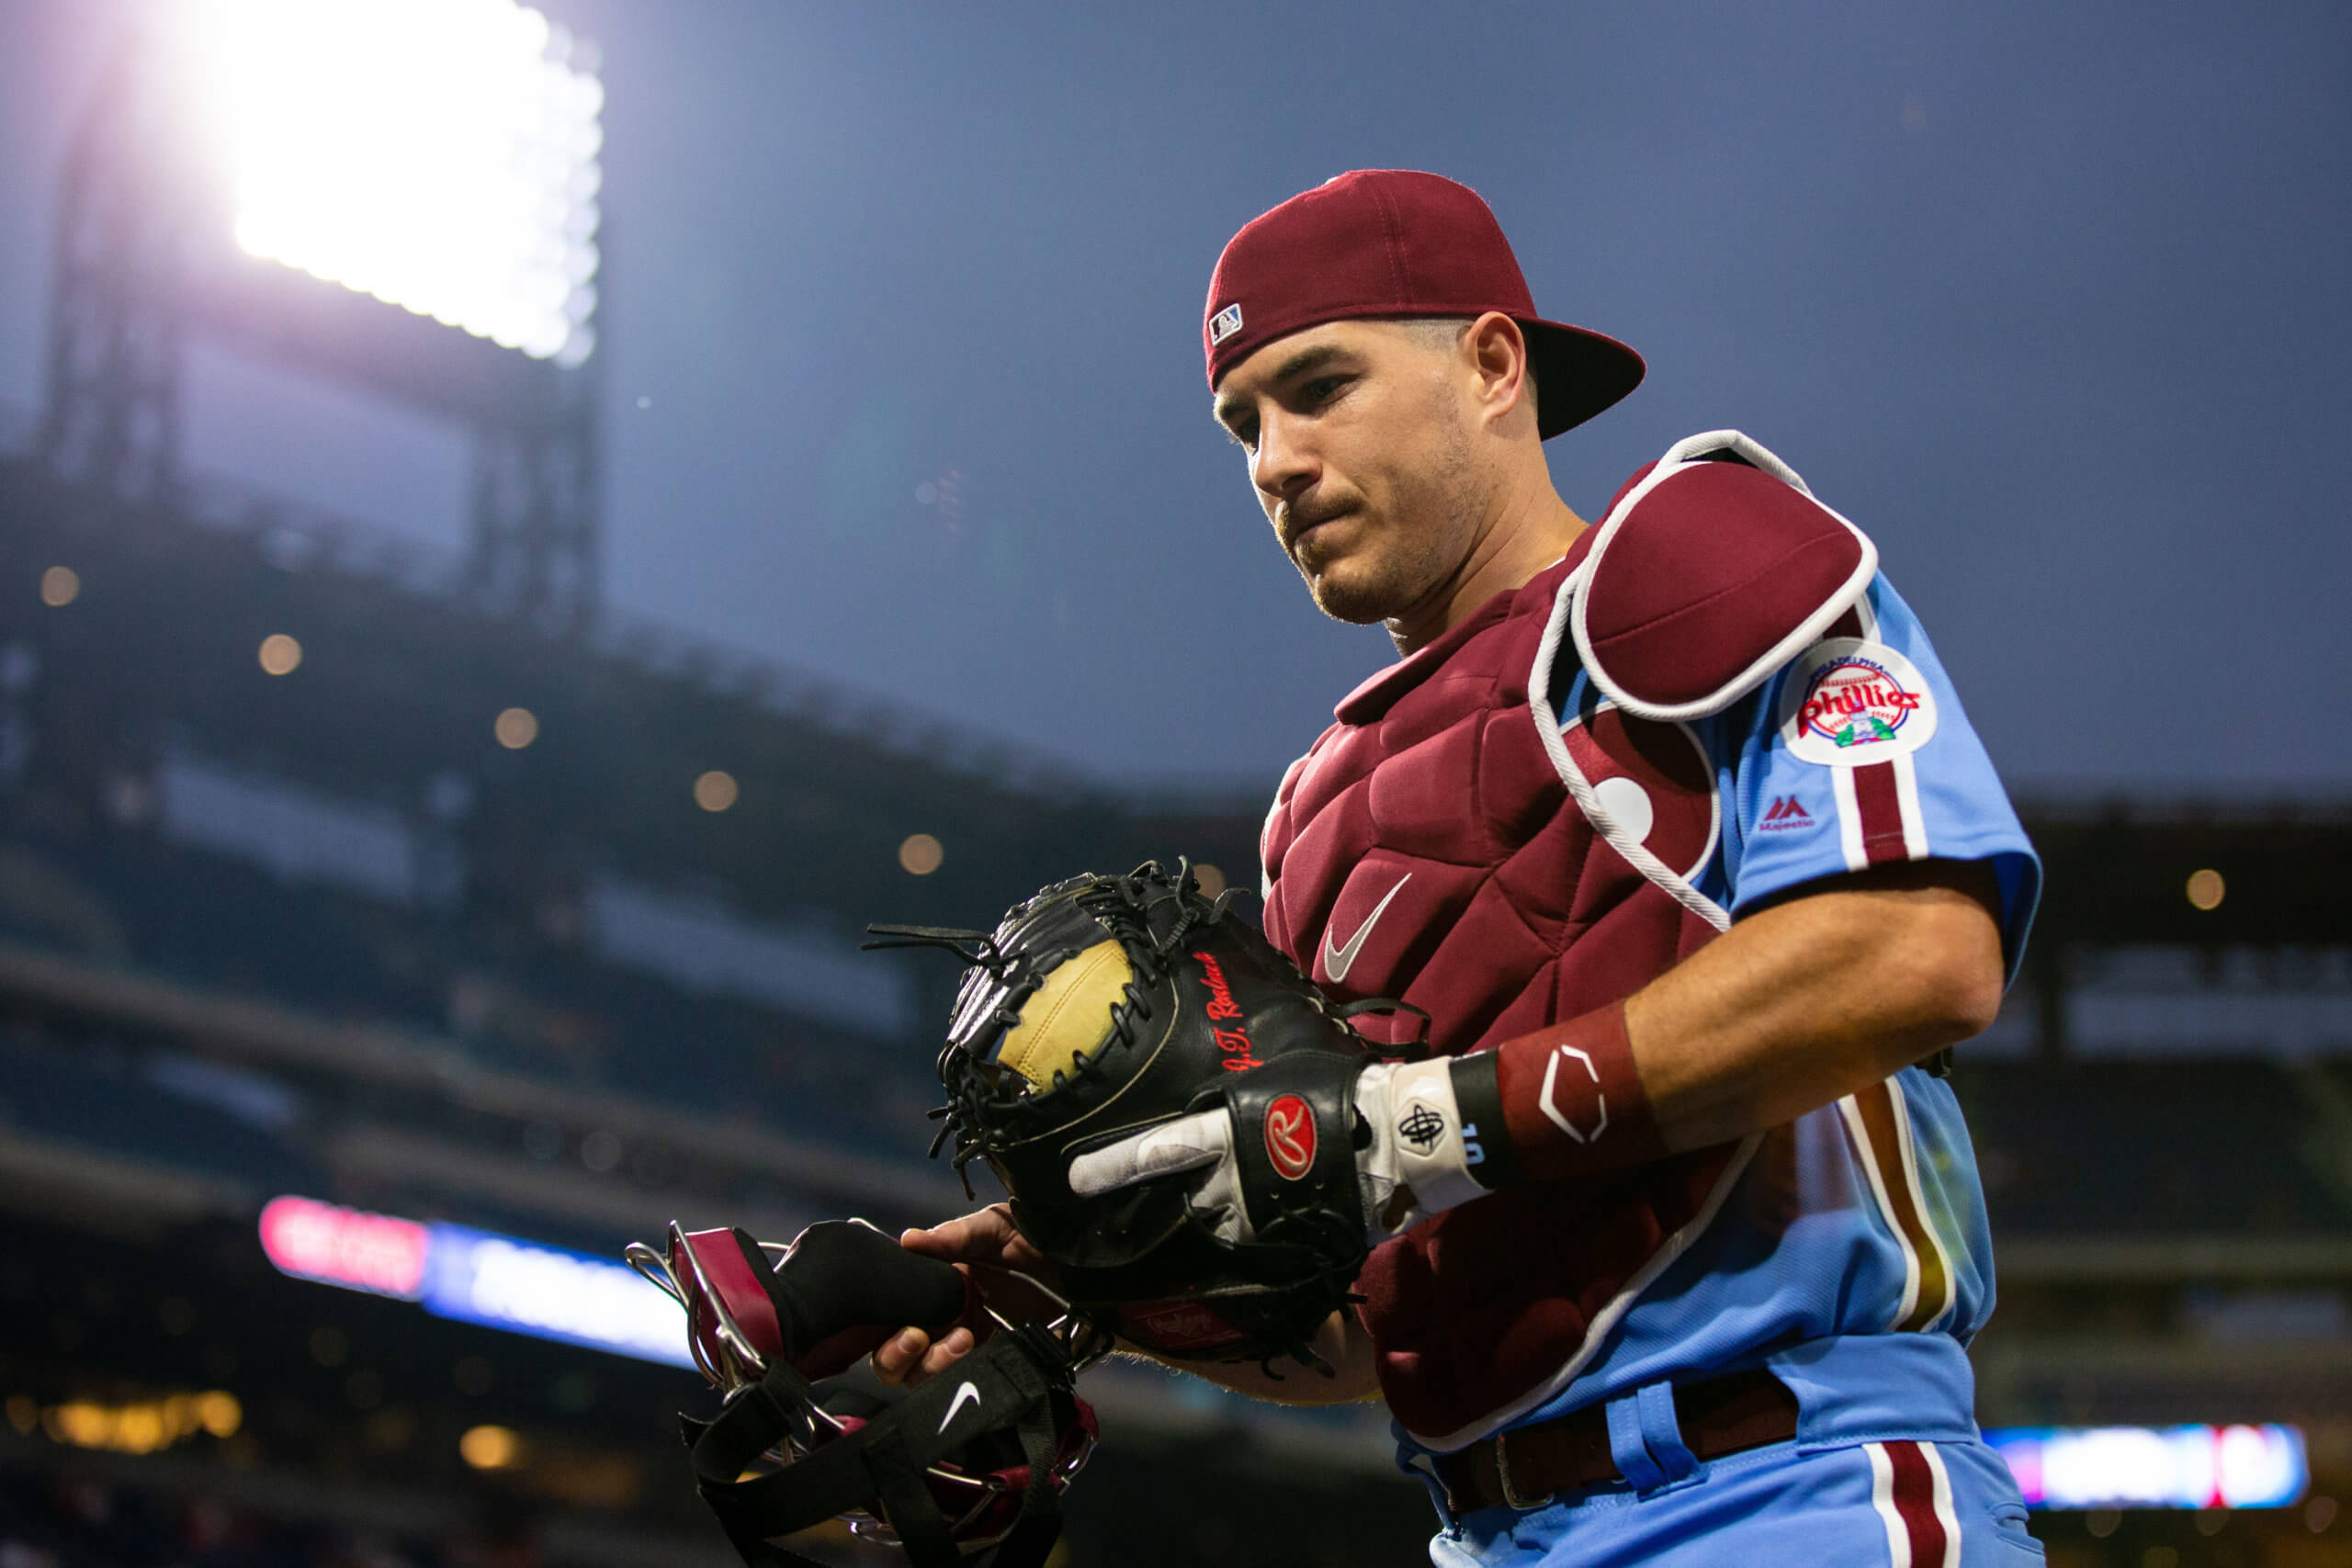 Philadelphia Phillies Star Catcher J.T. Realmuto is Playing the